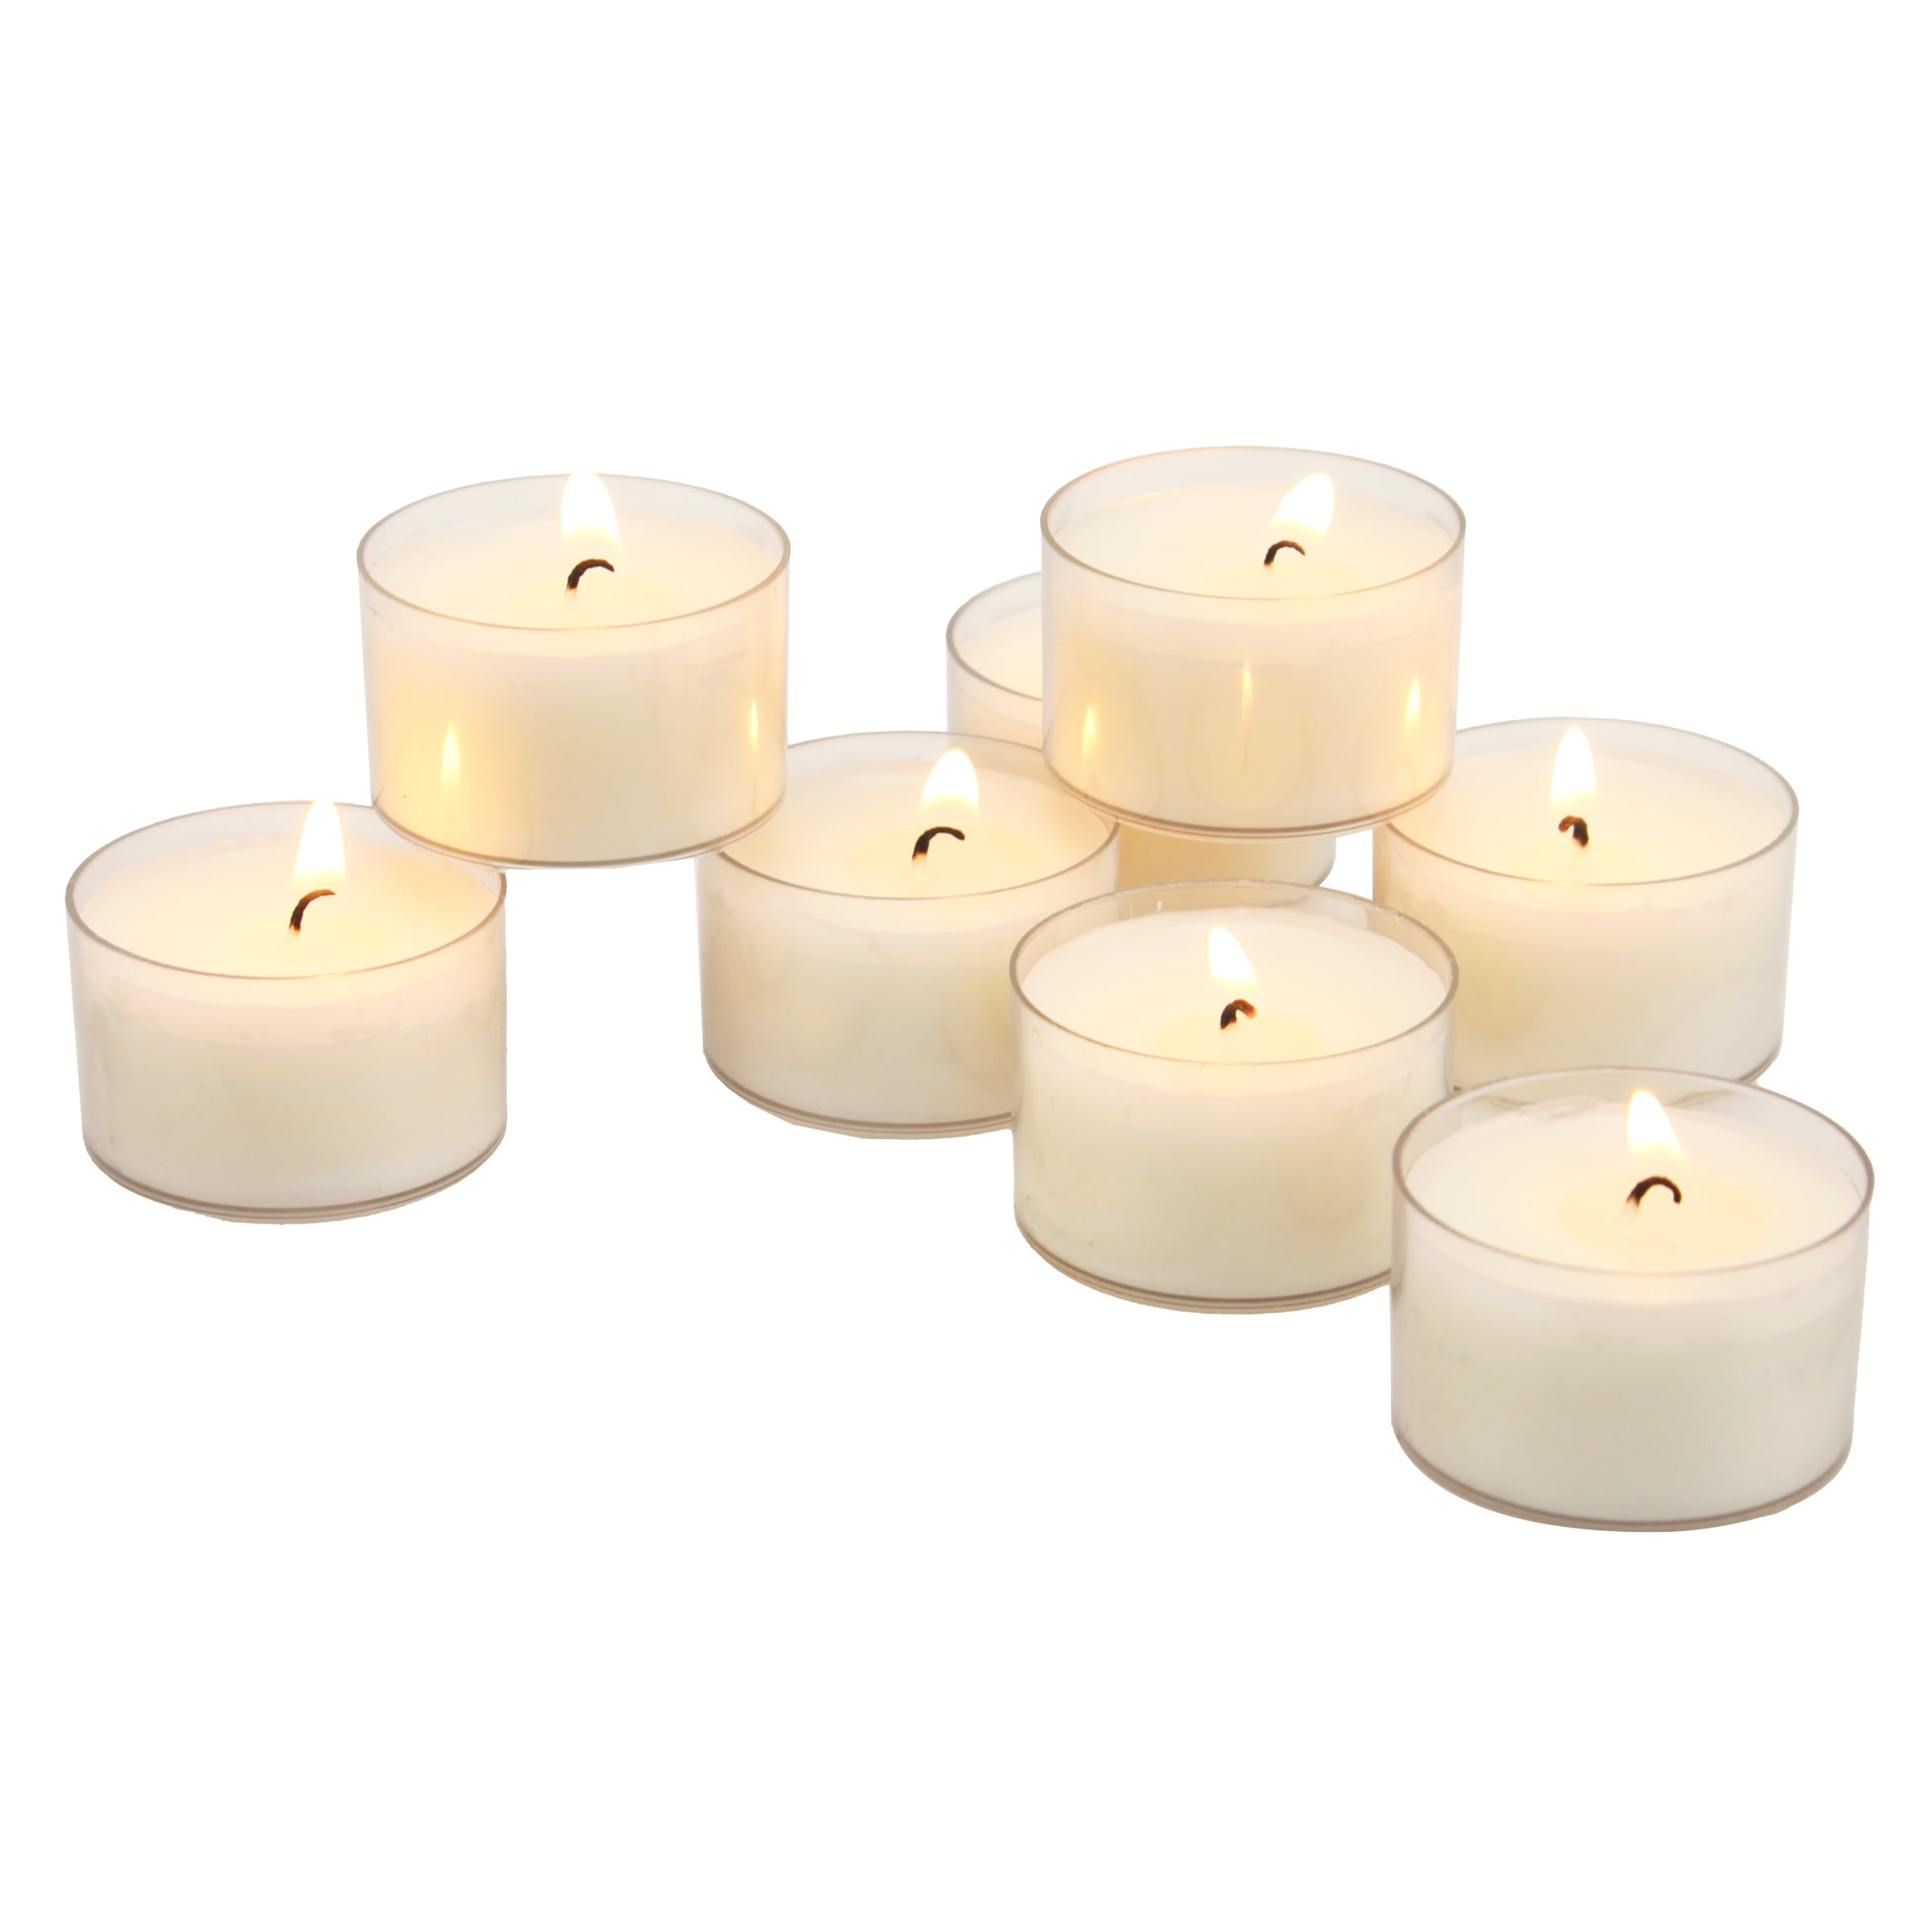 Candles 100 Tea Lights Set White Candles of Best Quality best for Home Decor 